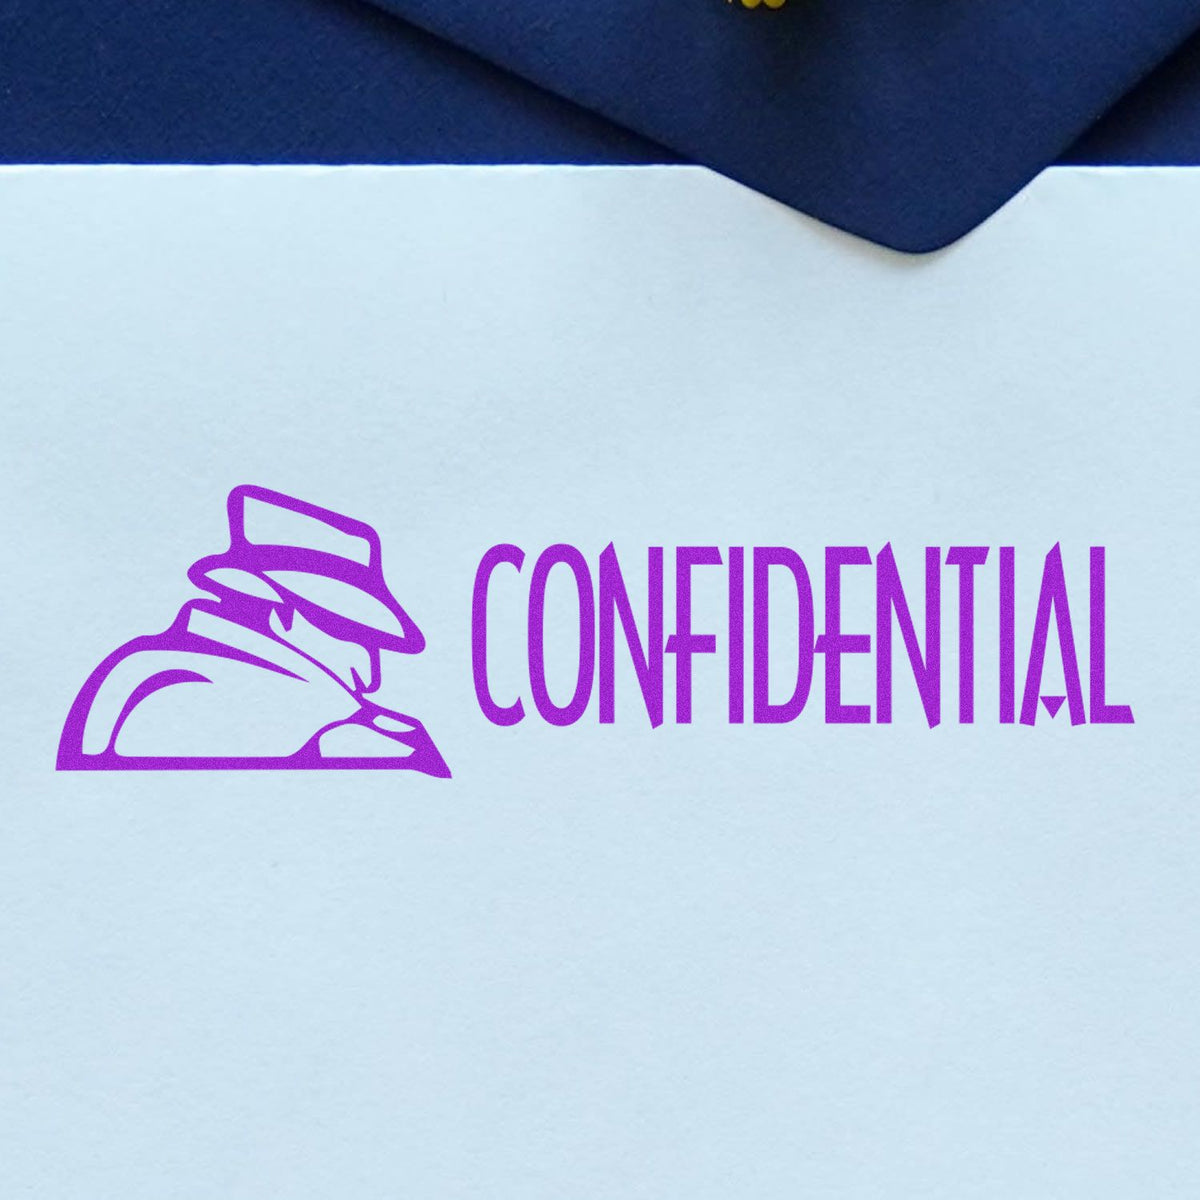 Slim Pre-Inked Confidential with Logo Stamp In Use